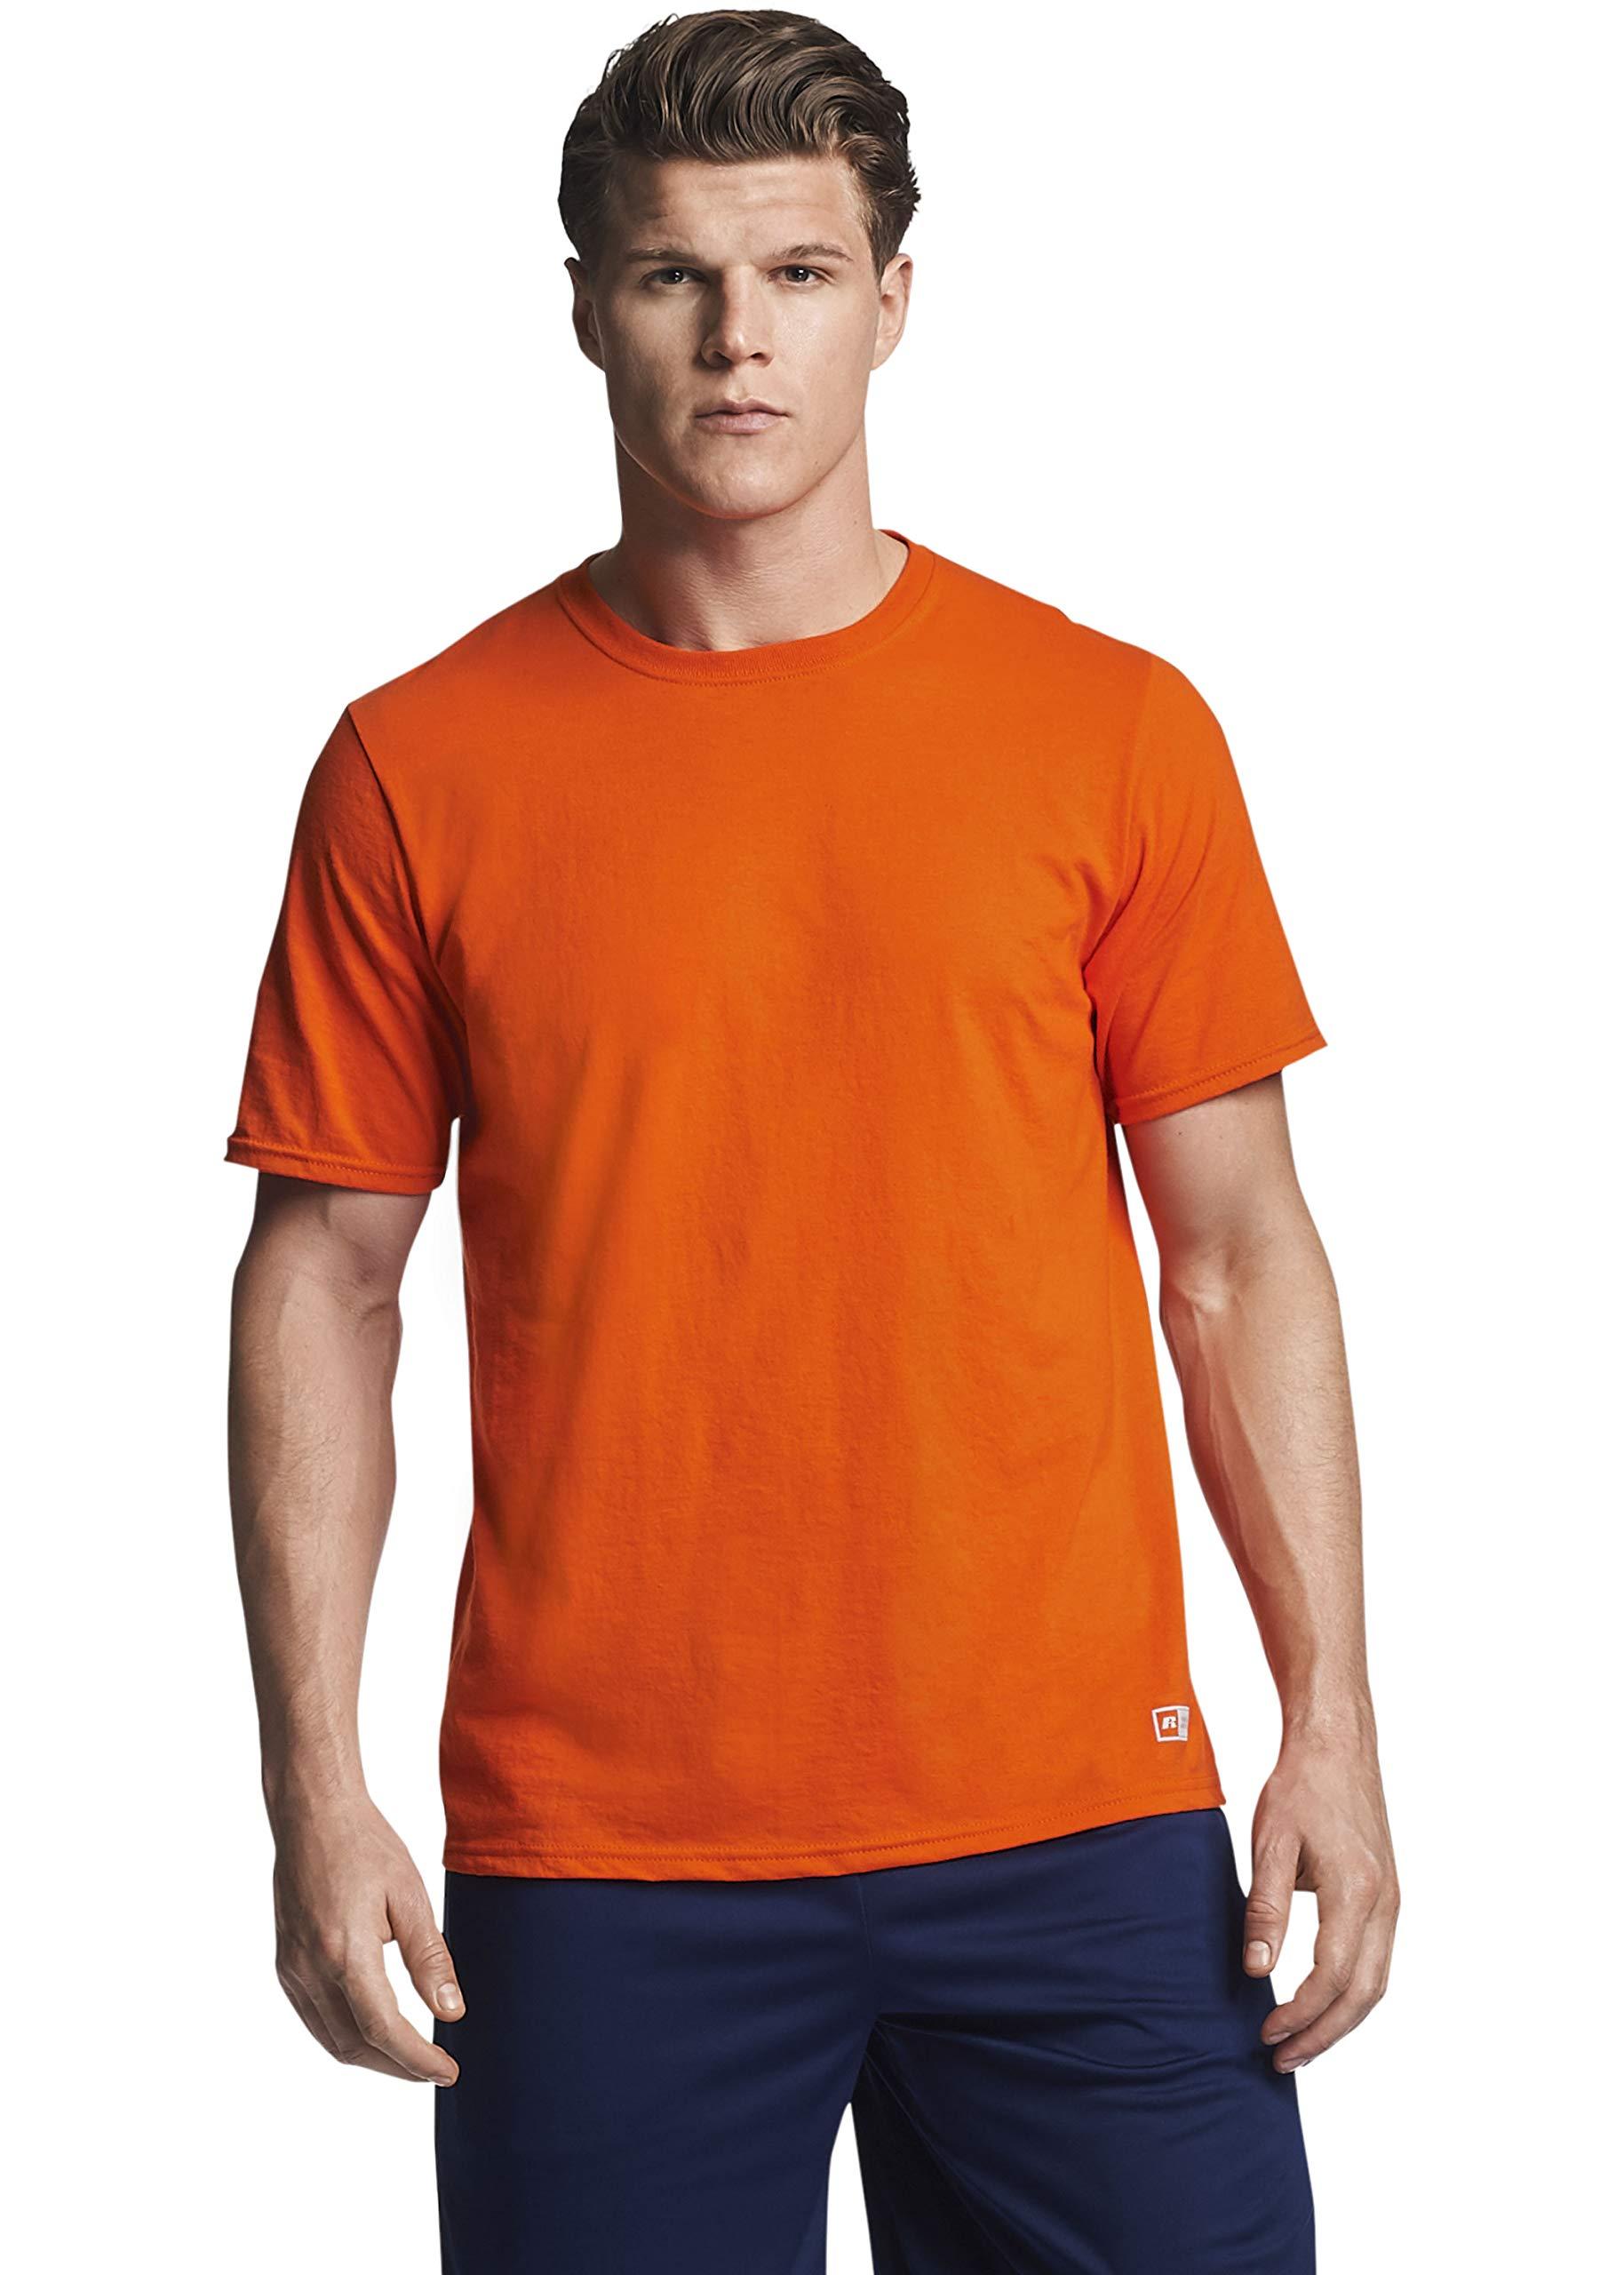 Russell Athletic Cotton Performance Short Sleeve T-shirt in Burnt ...